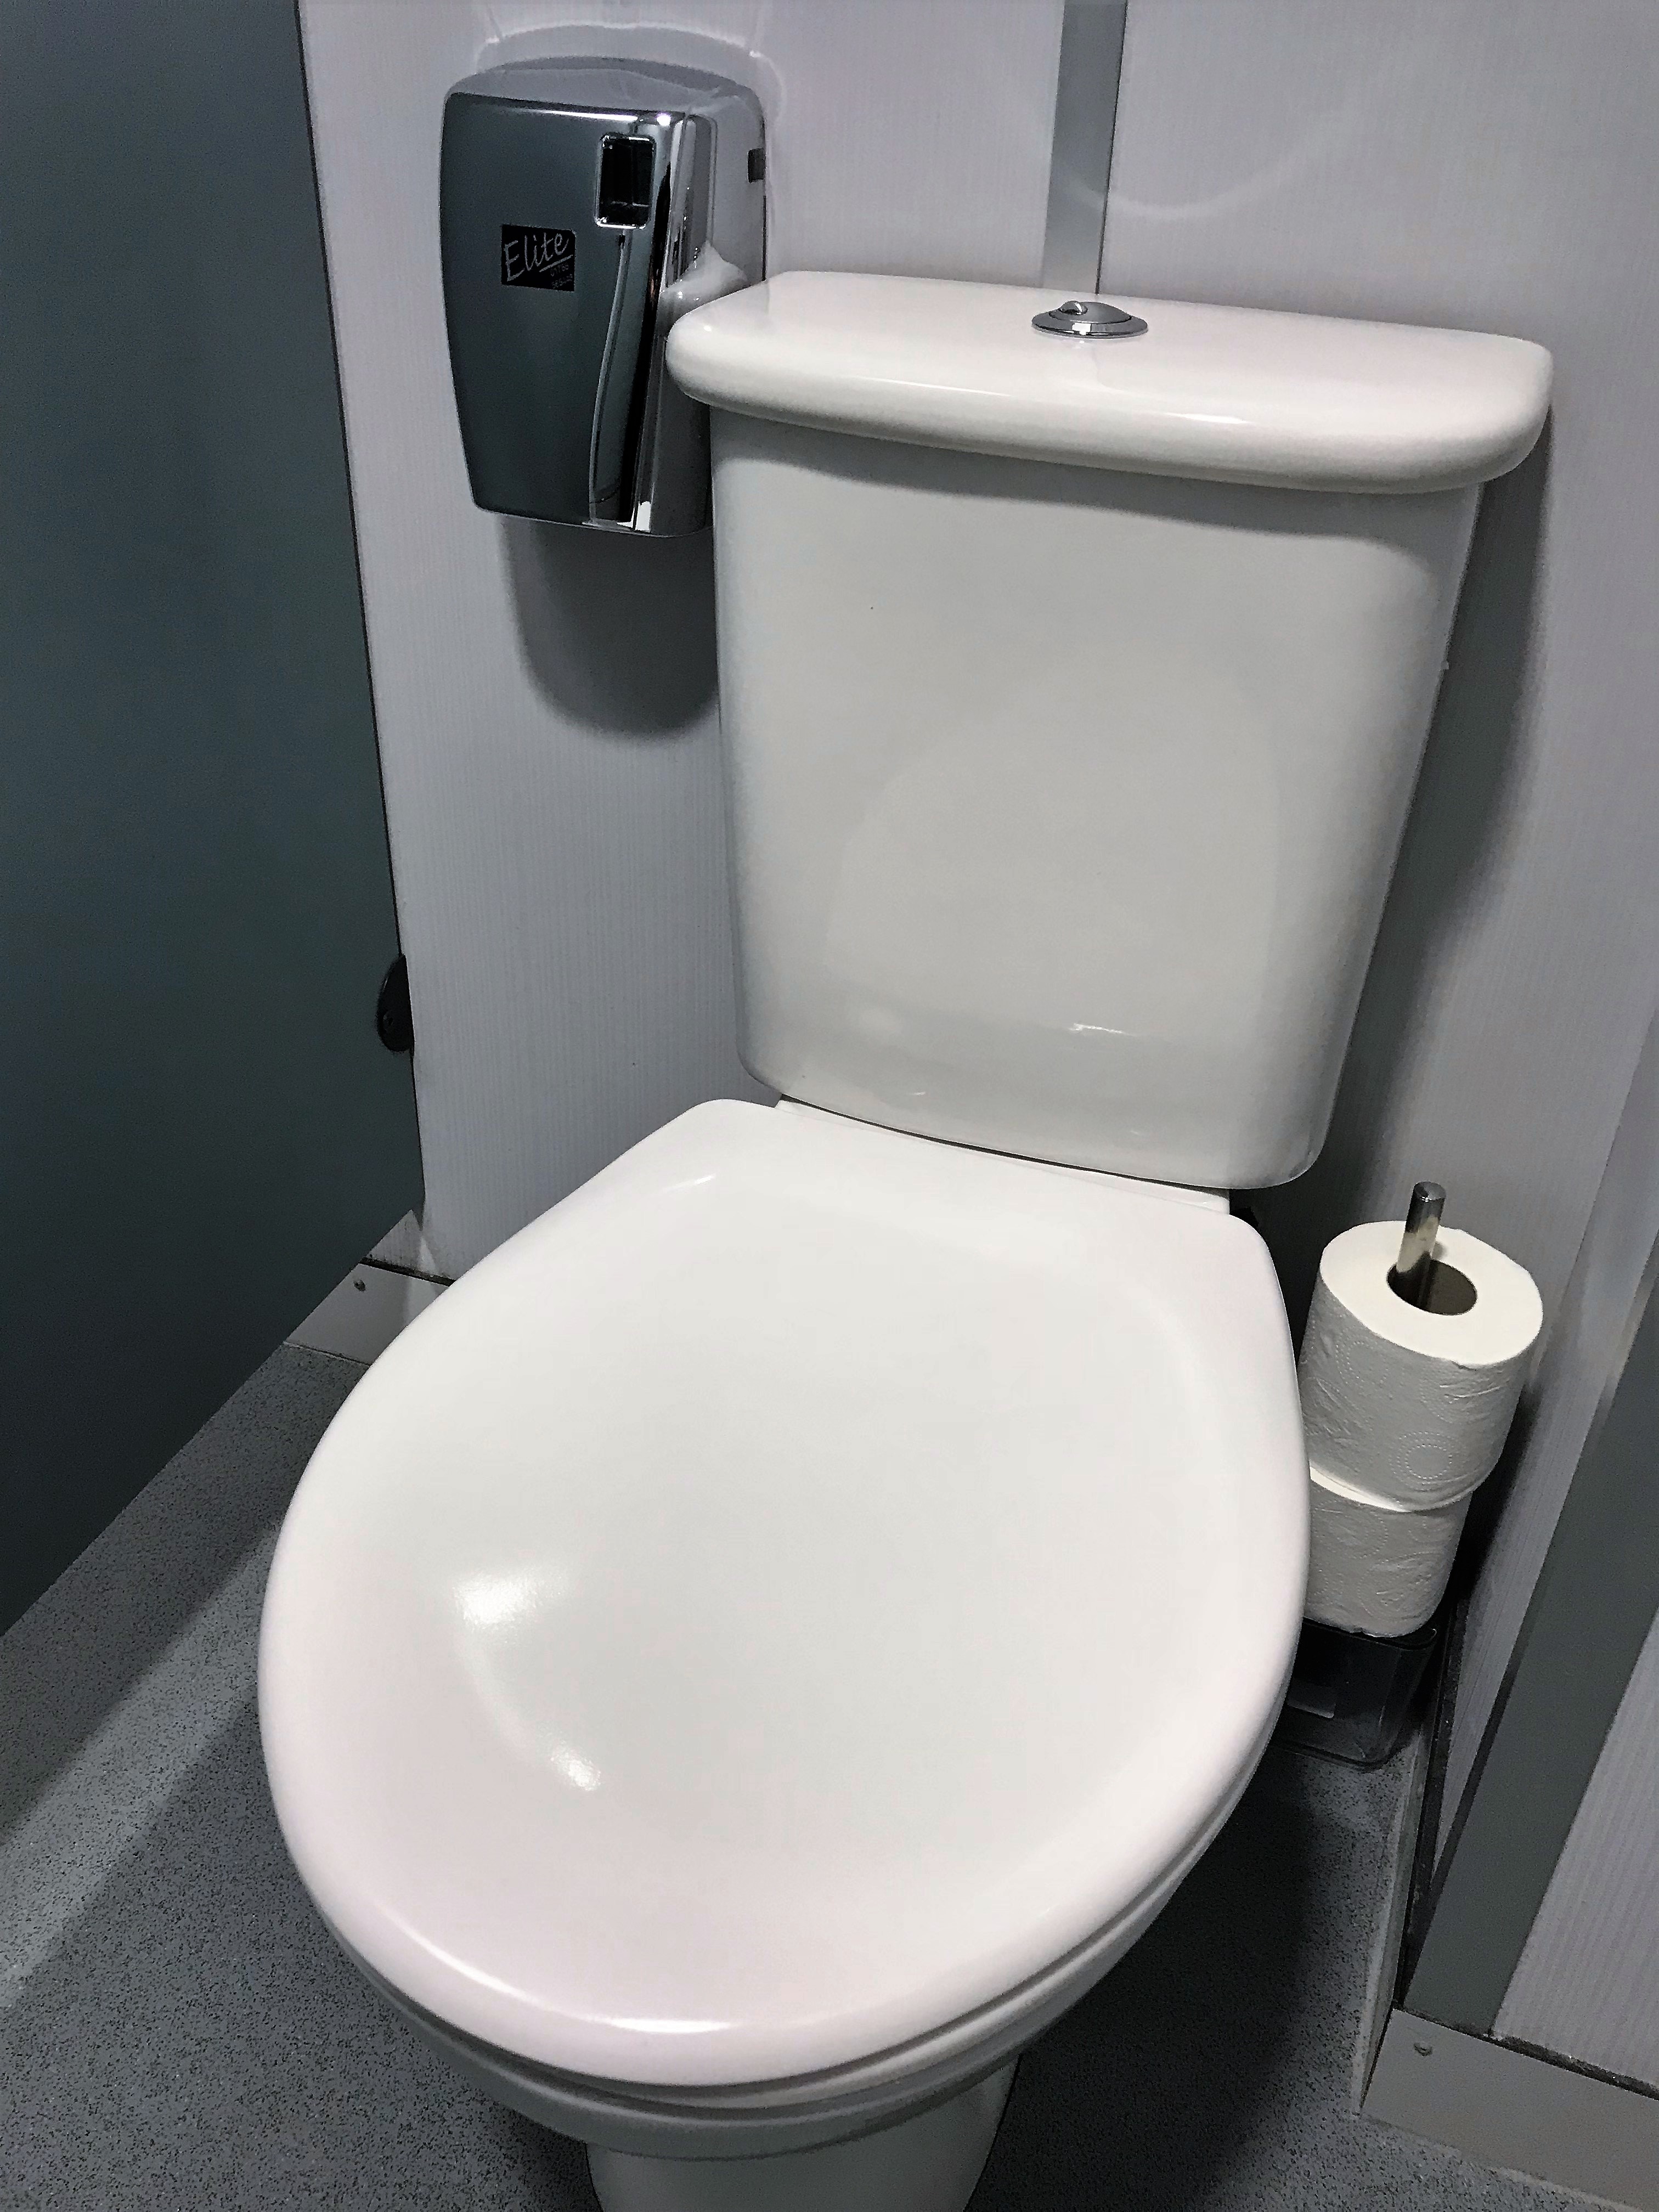 Washroom services: Urinal and WC treatment